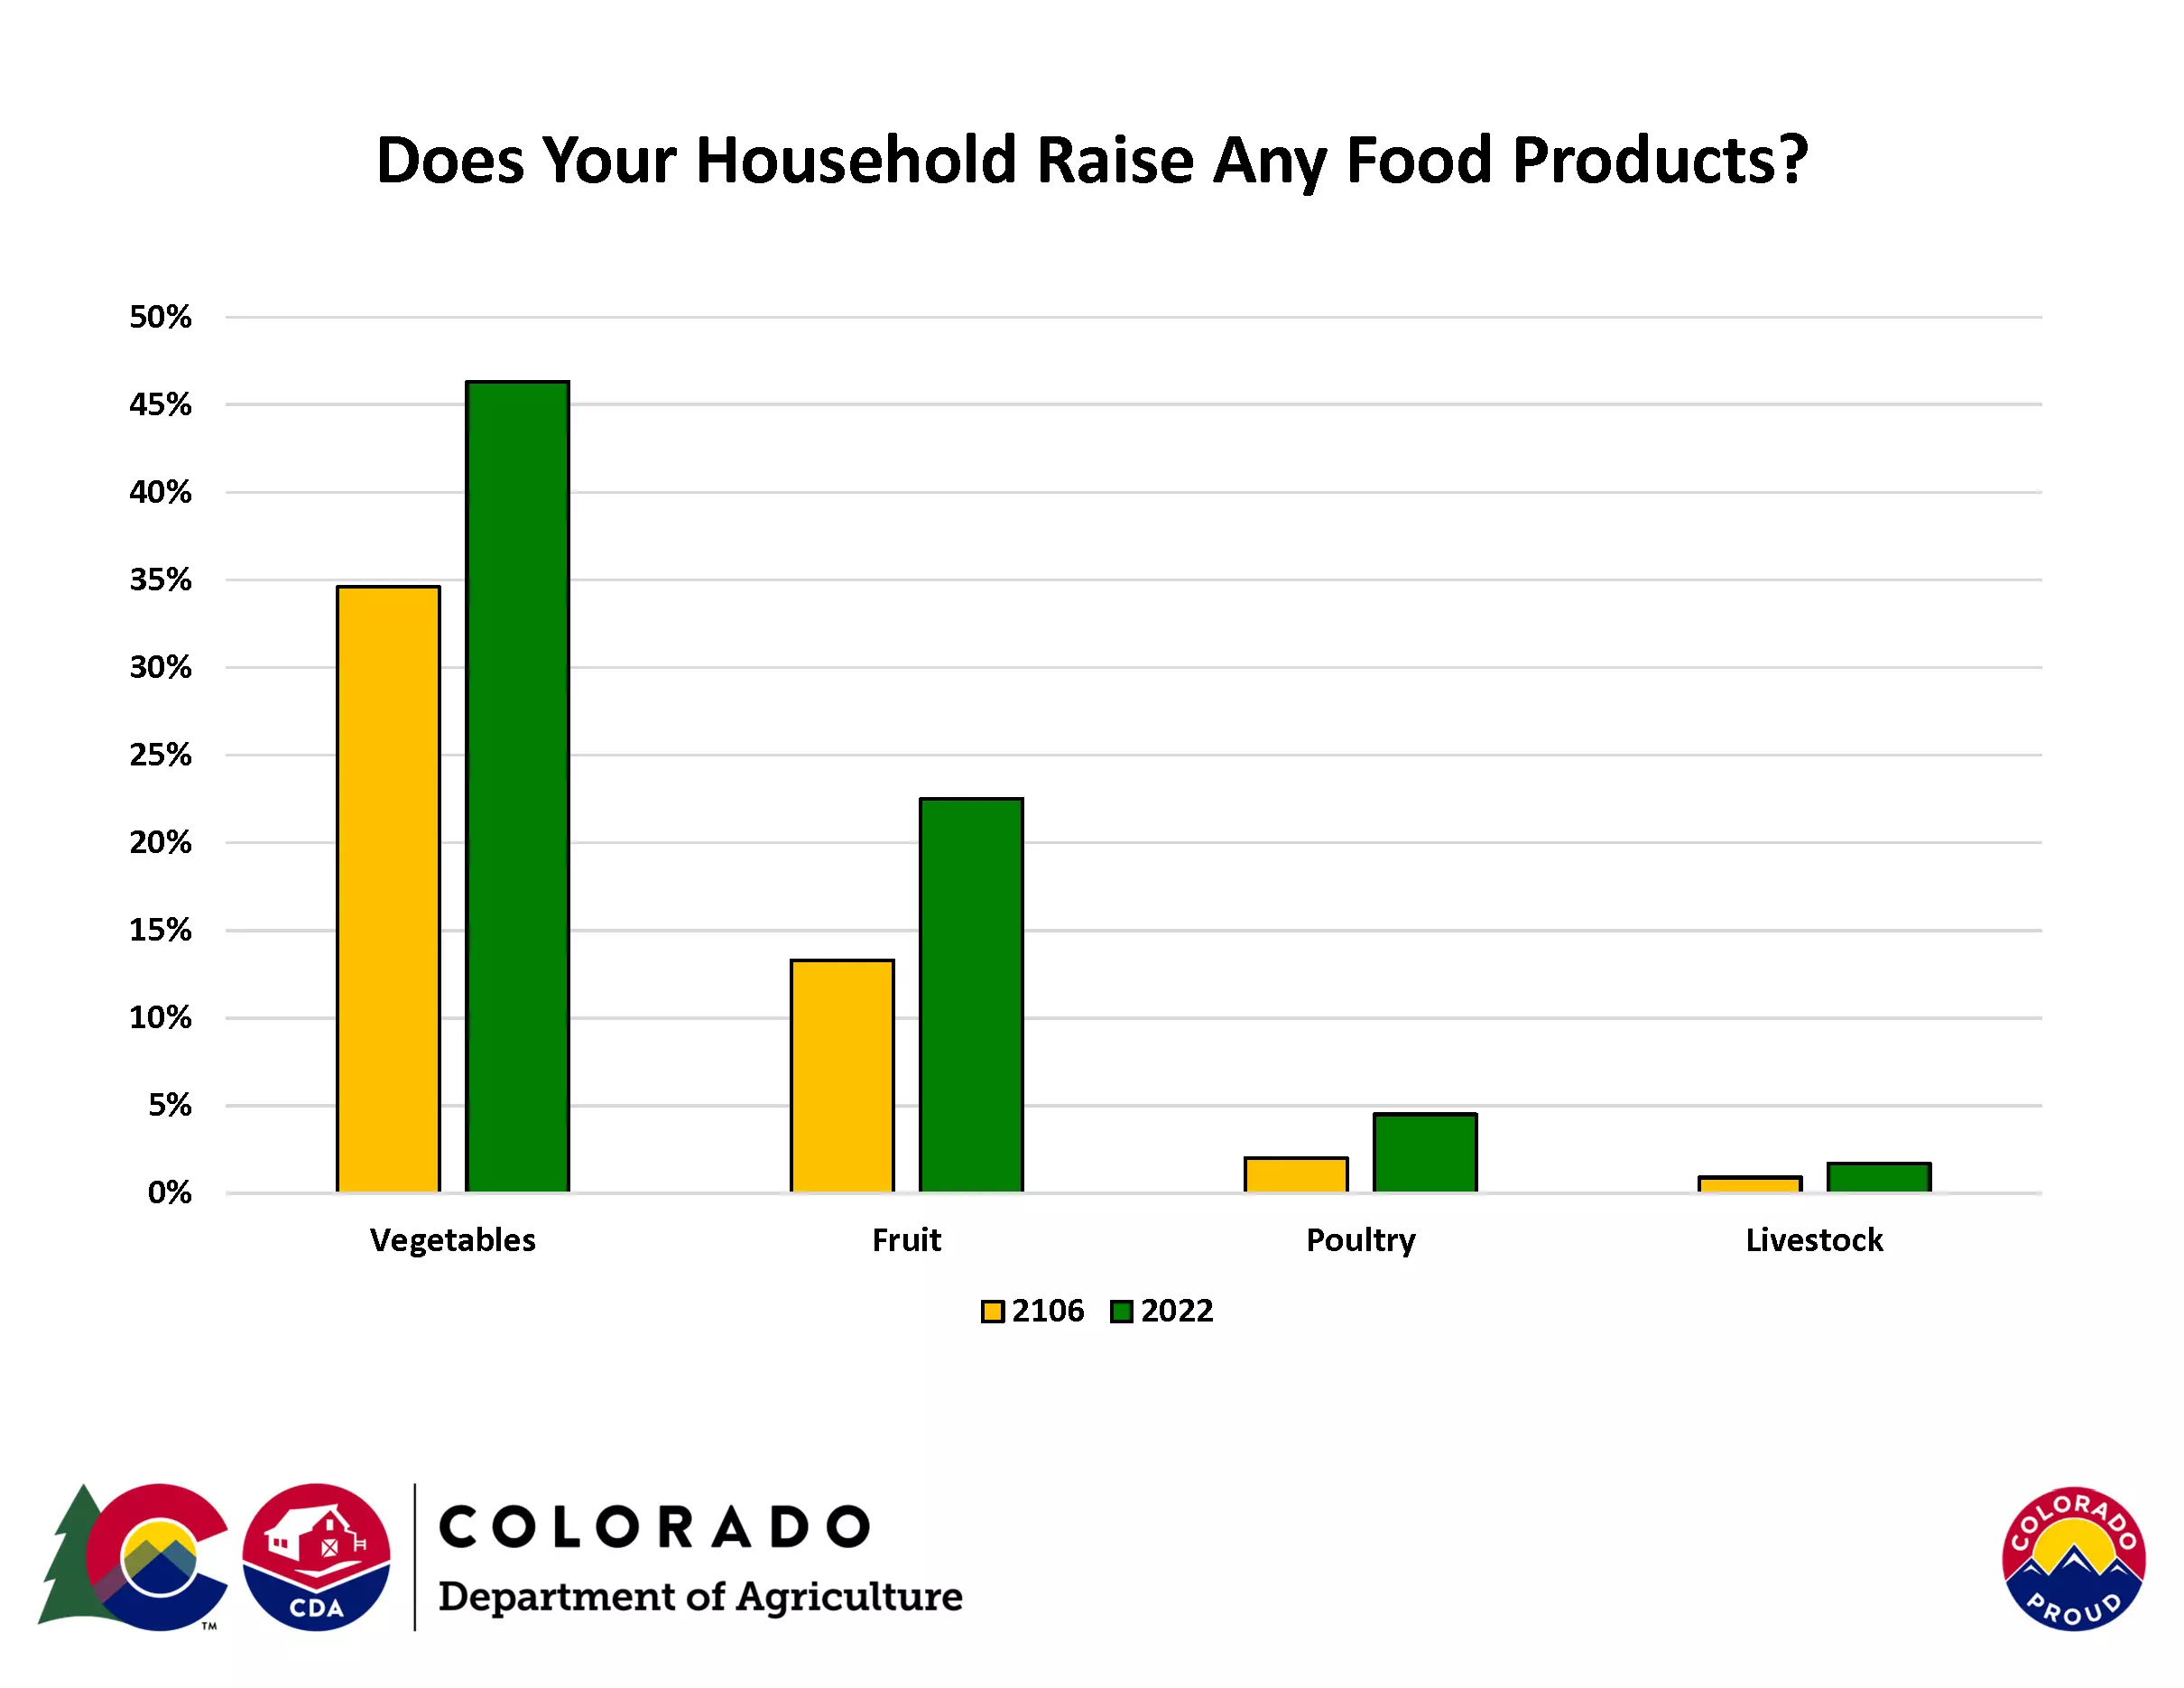 Does Your Household Raise Any Food Products?